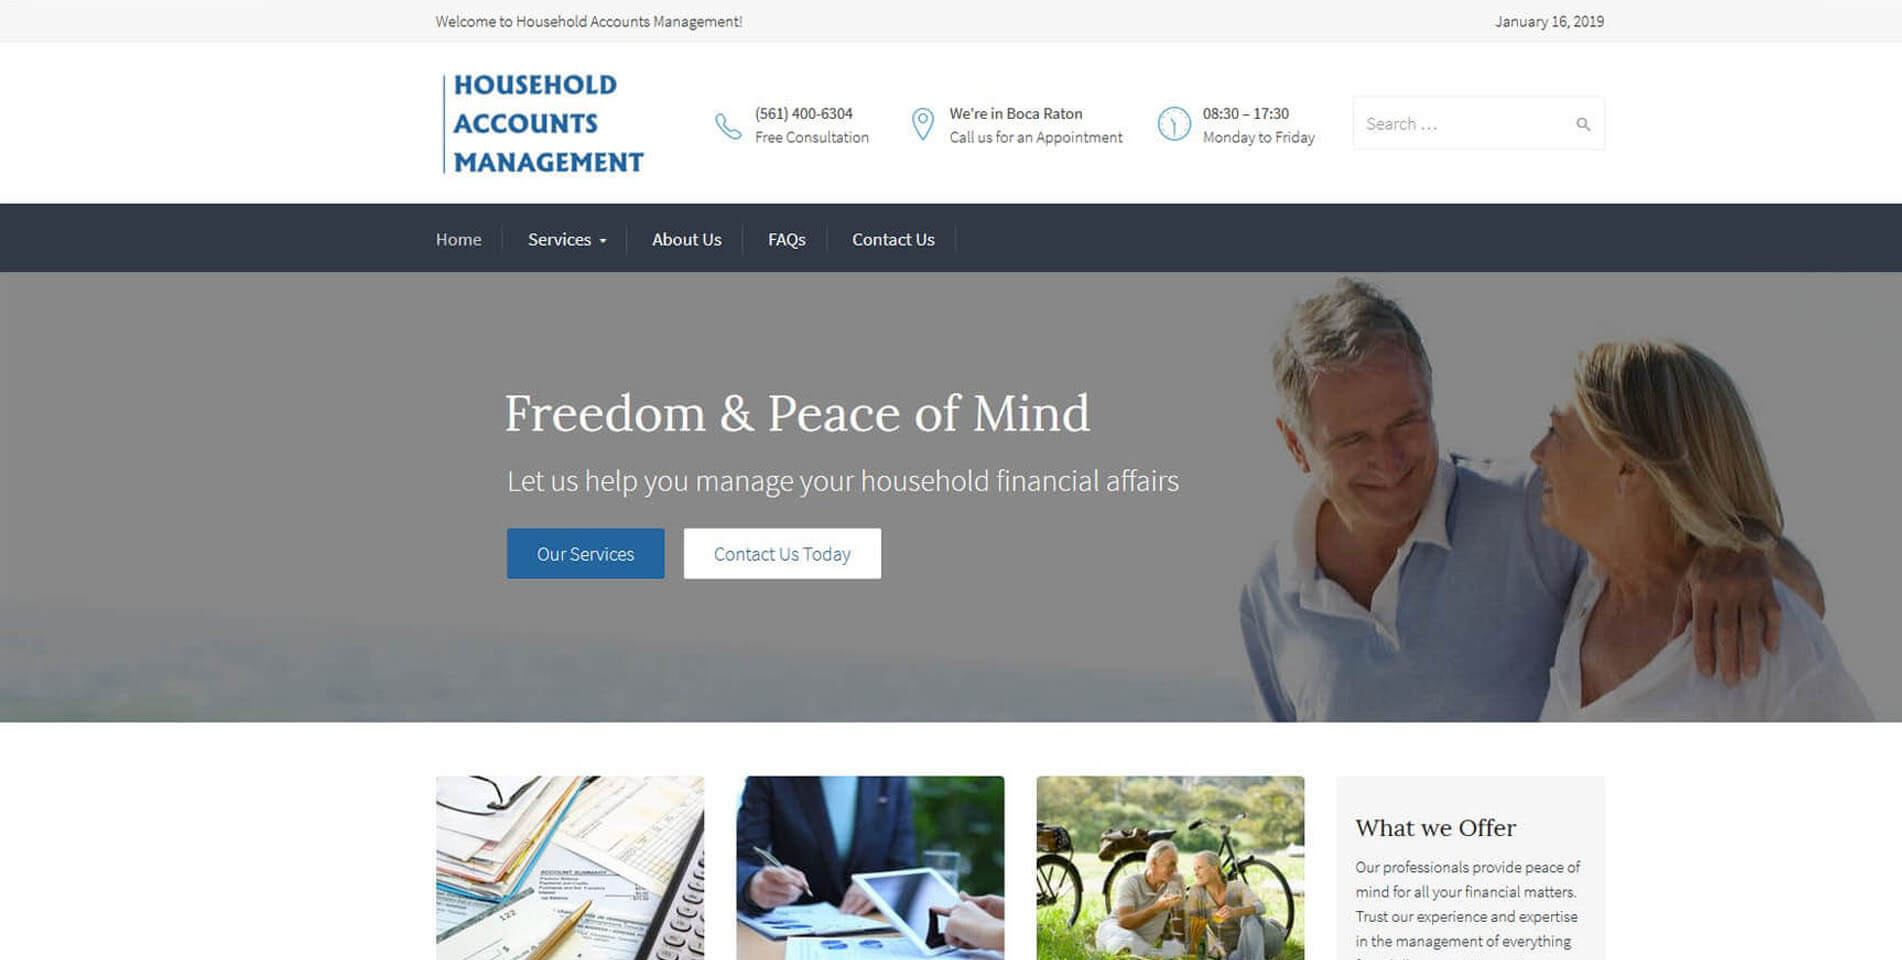 An image of the homepage of Household Accounts Management, website created by Not Fade Away Marketing